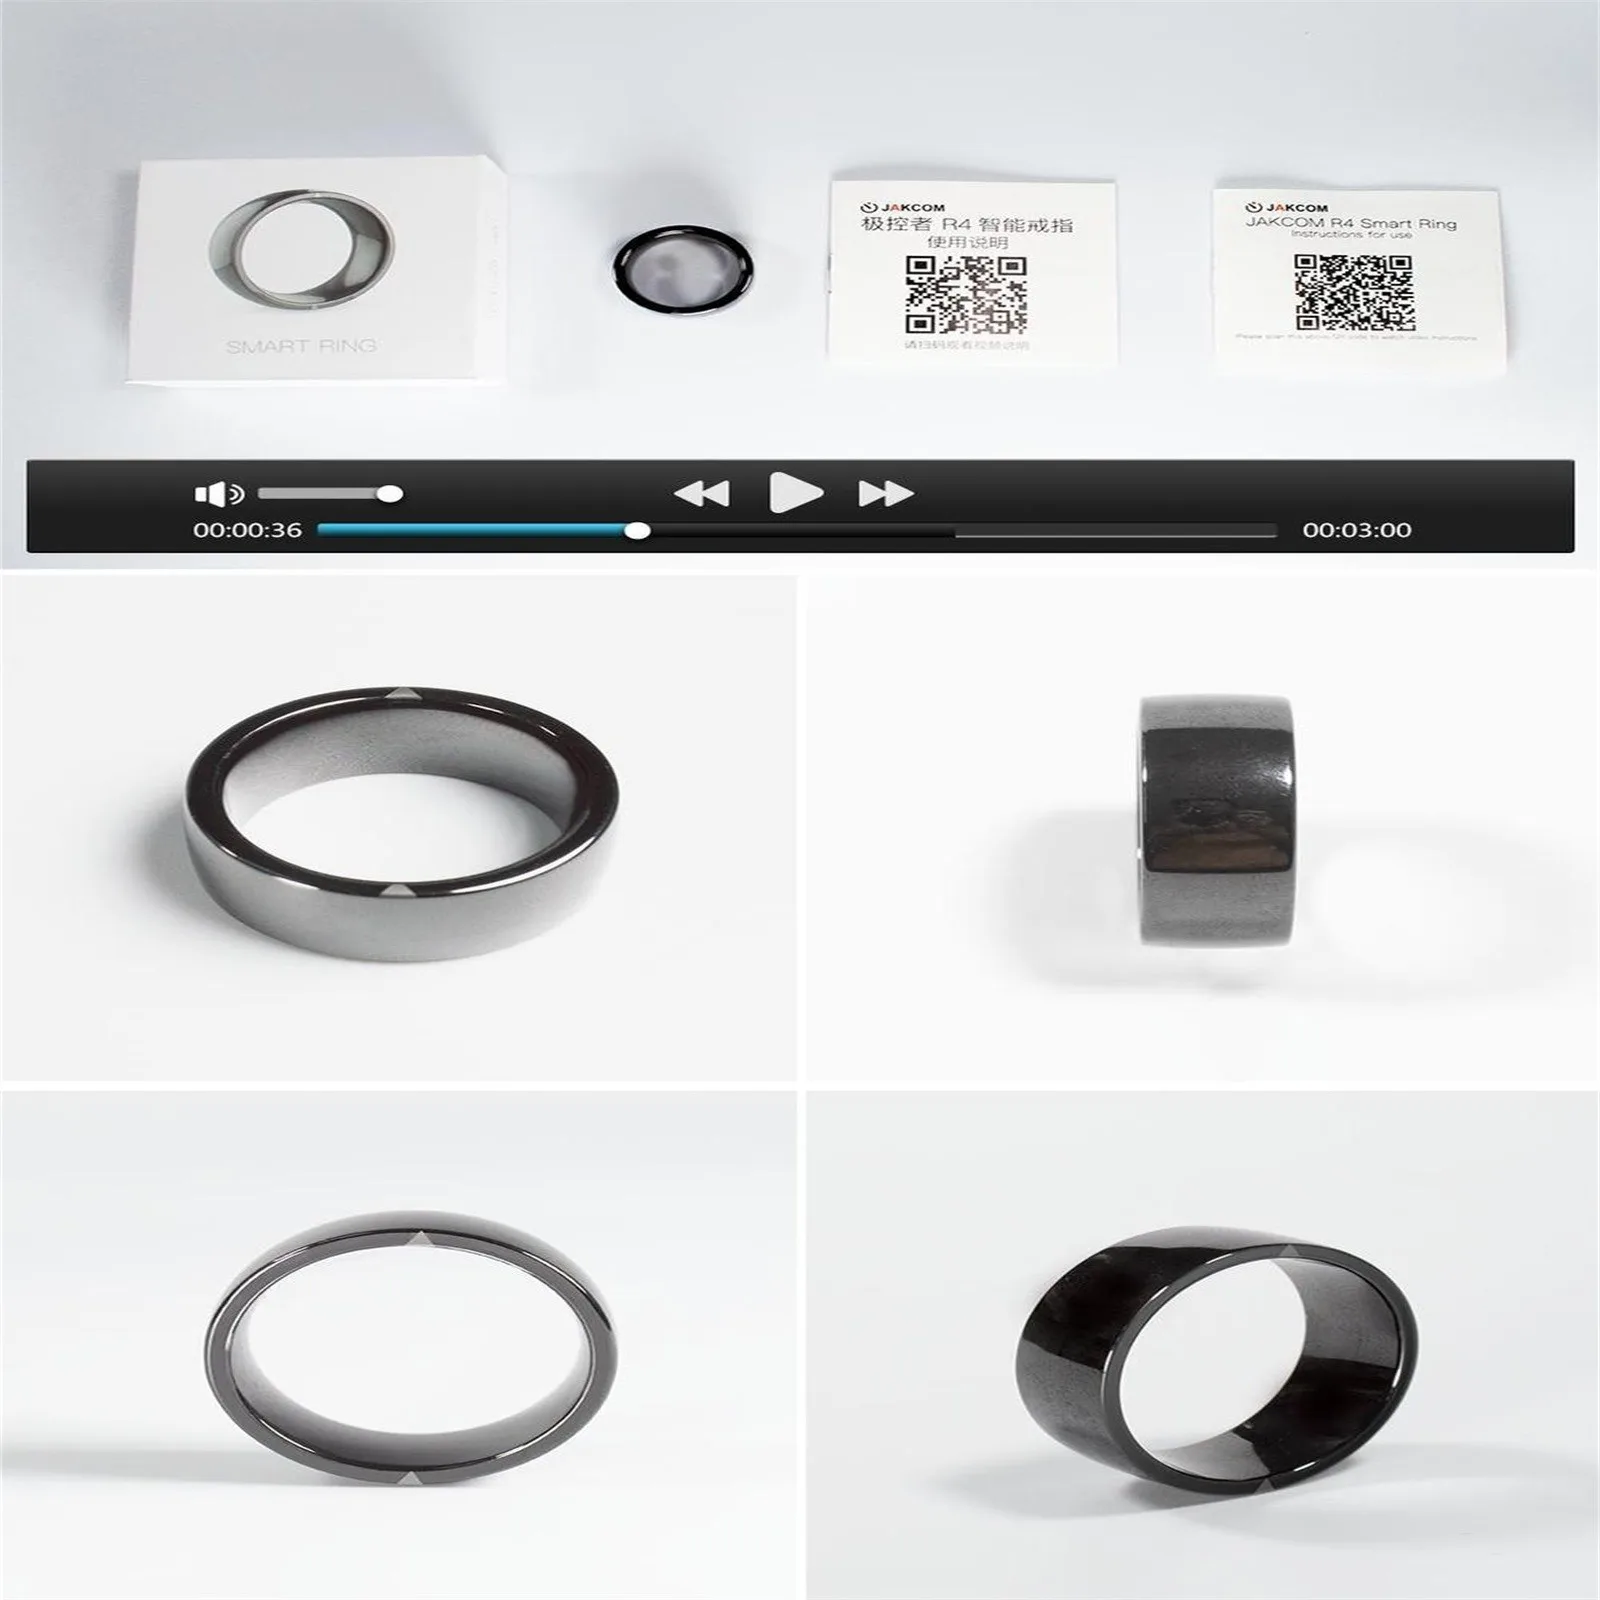 R4 Smart Ring waterproof dust-proof fall-proof for NFC Electronics Mobile IOS Android Smartphone wearable magic ring Smart Ring